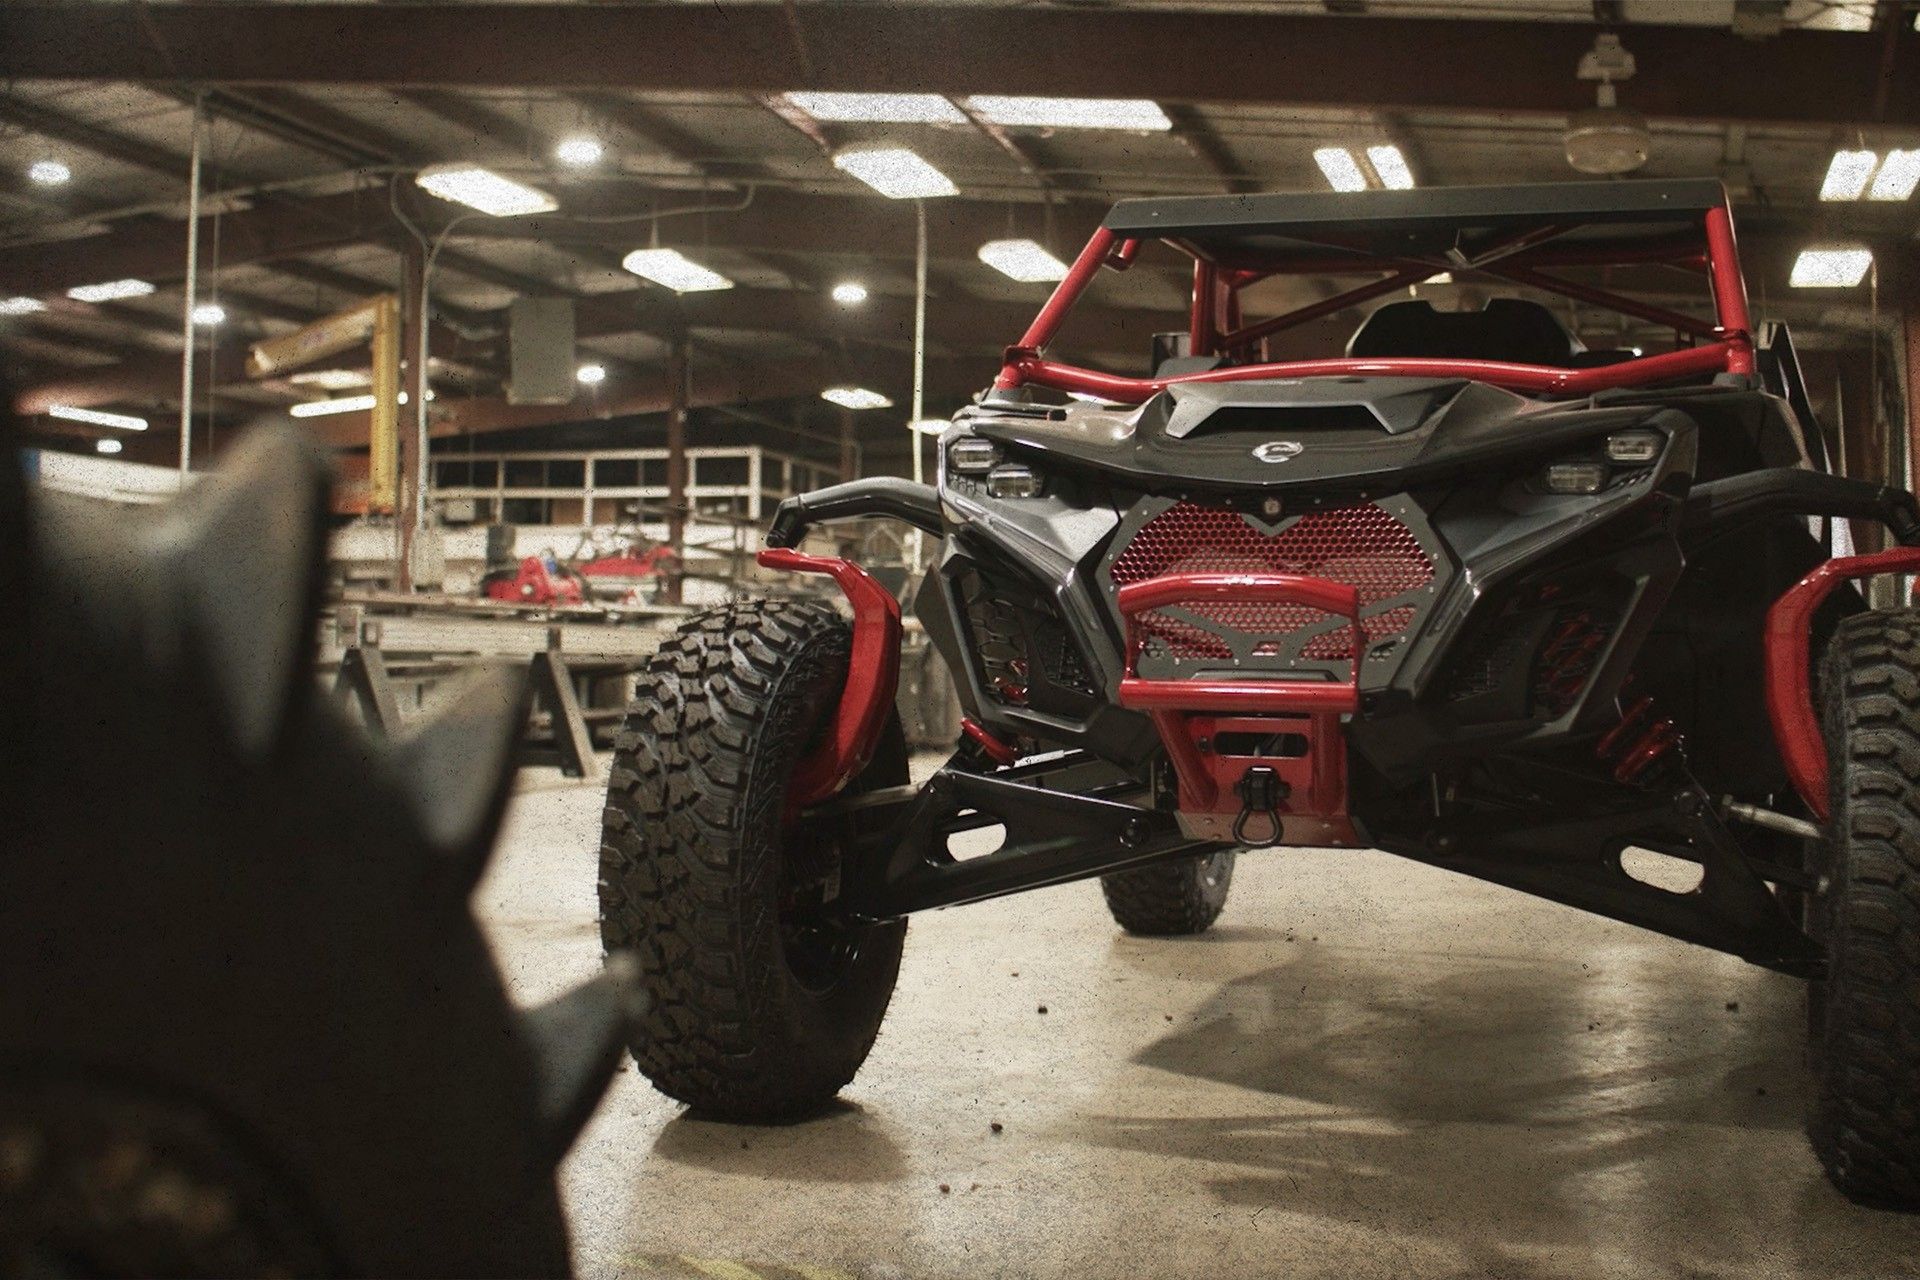 Red and black off-road vehicle